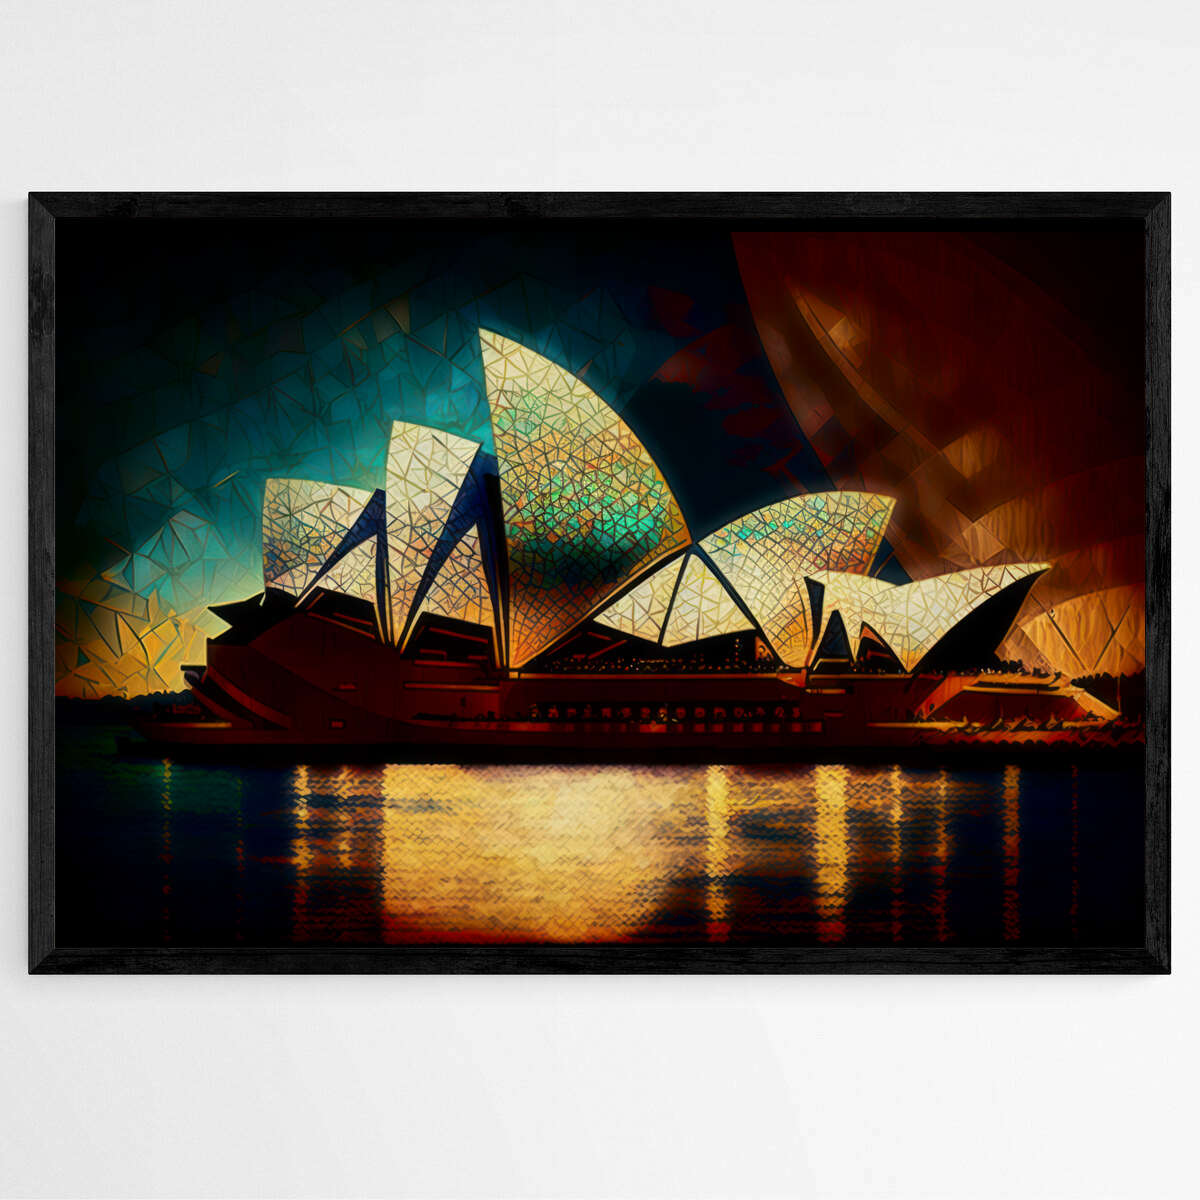 Sydney Opera House - Mosaic Tapestry | Destinations Wall Art Prints - The Canvas Hive